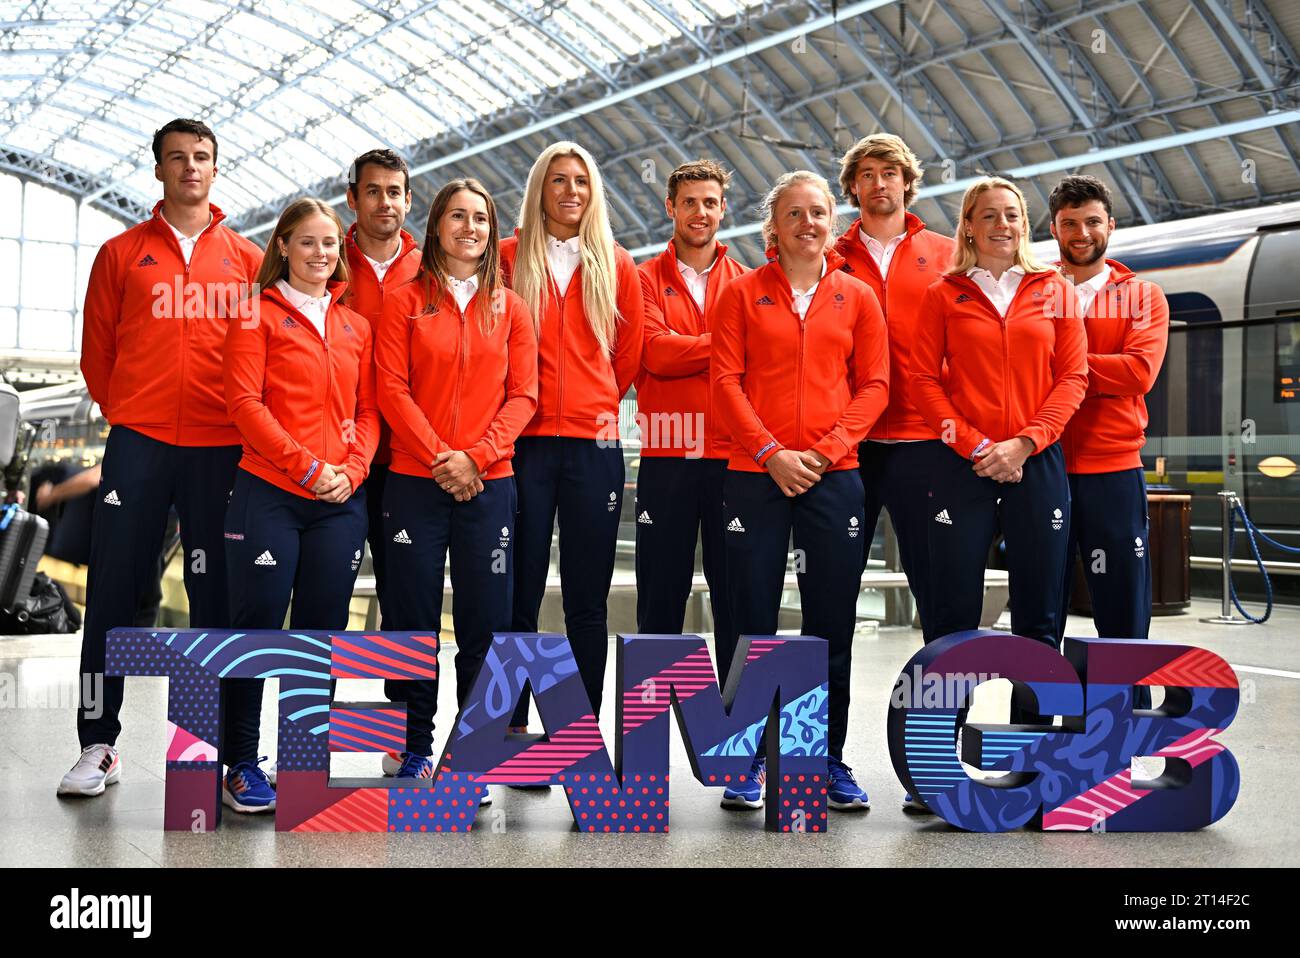 London. United Kingdom. 11 October 2023. TeamGB athlete announcement, sailing. St Pancras Station. London. (l to r) Michael Beckett - Men's Dinghy (ILCA 7), Freya Black - Women's Skiff (49erFX), John Gimson - Mixed Multihull (Nacra 17), Anna Burnet - Mixed Multihull (Nacra 17), Saskia Tidey - Women's Skiff (49erFX), Fynn Sterritt - Men's Skiff (49er), Emma Wilson - Women's Windsurfing (iQFOiL), Sam Sills - Men's Windsurfing (iQFOiL), Ellie Aldridge - Women's Kite (Formula Kite) and James Peters - Men's Skiff (49er) during the announcement of the Sailing team to represent TeamGB at the Paris 20 Stock Photo